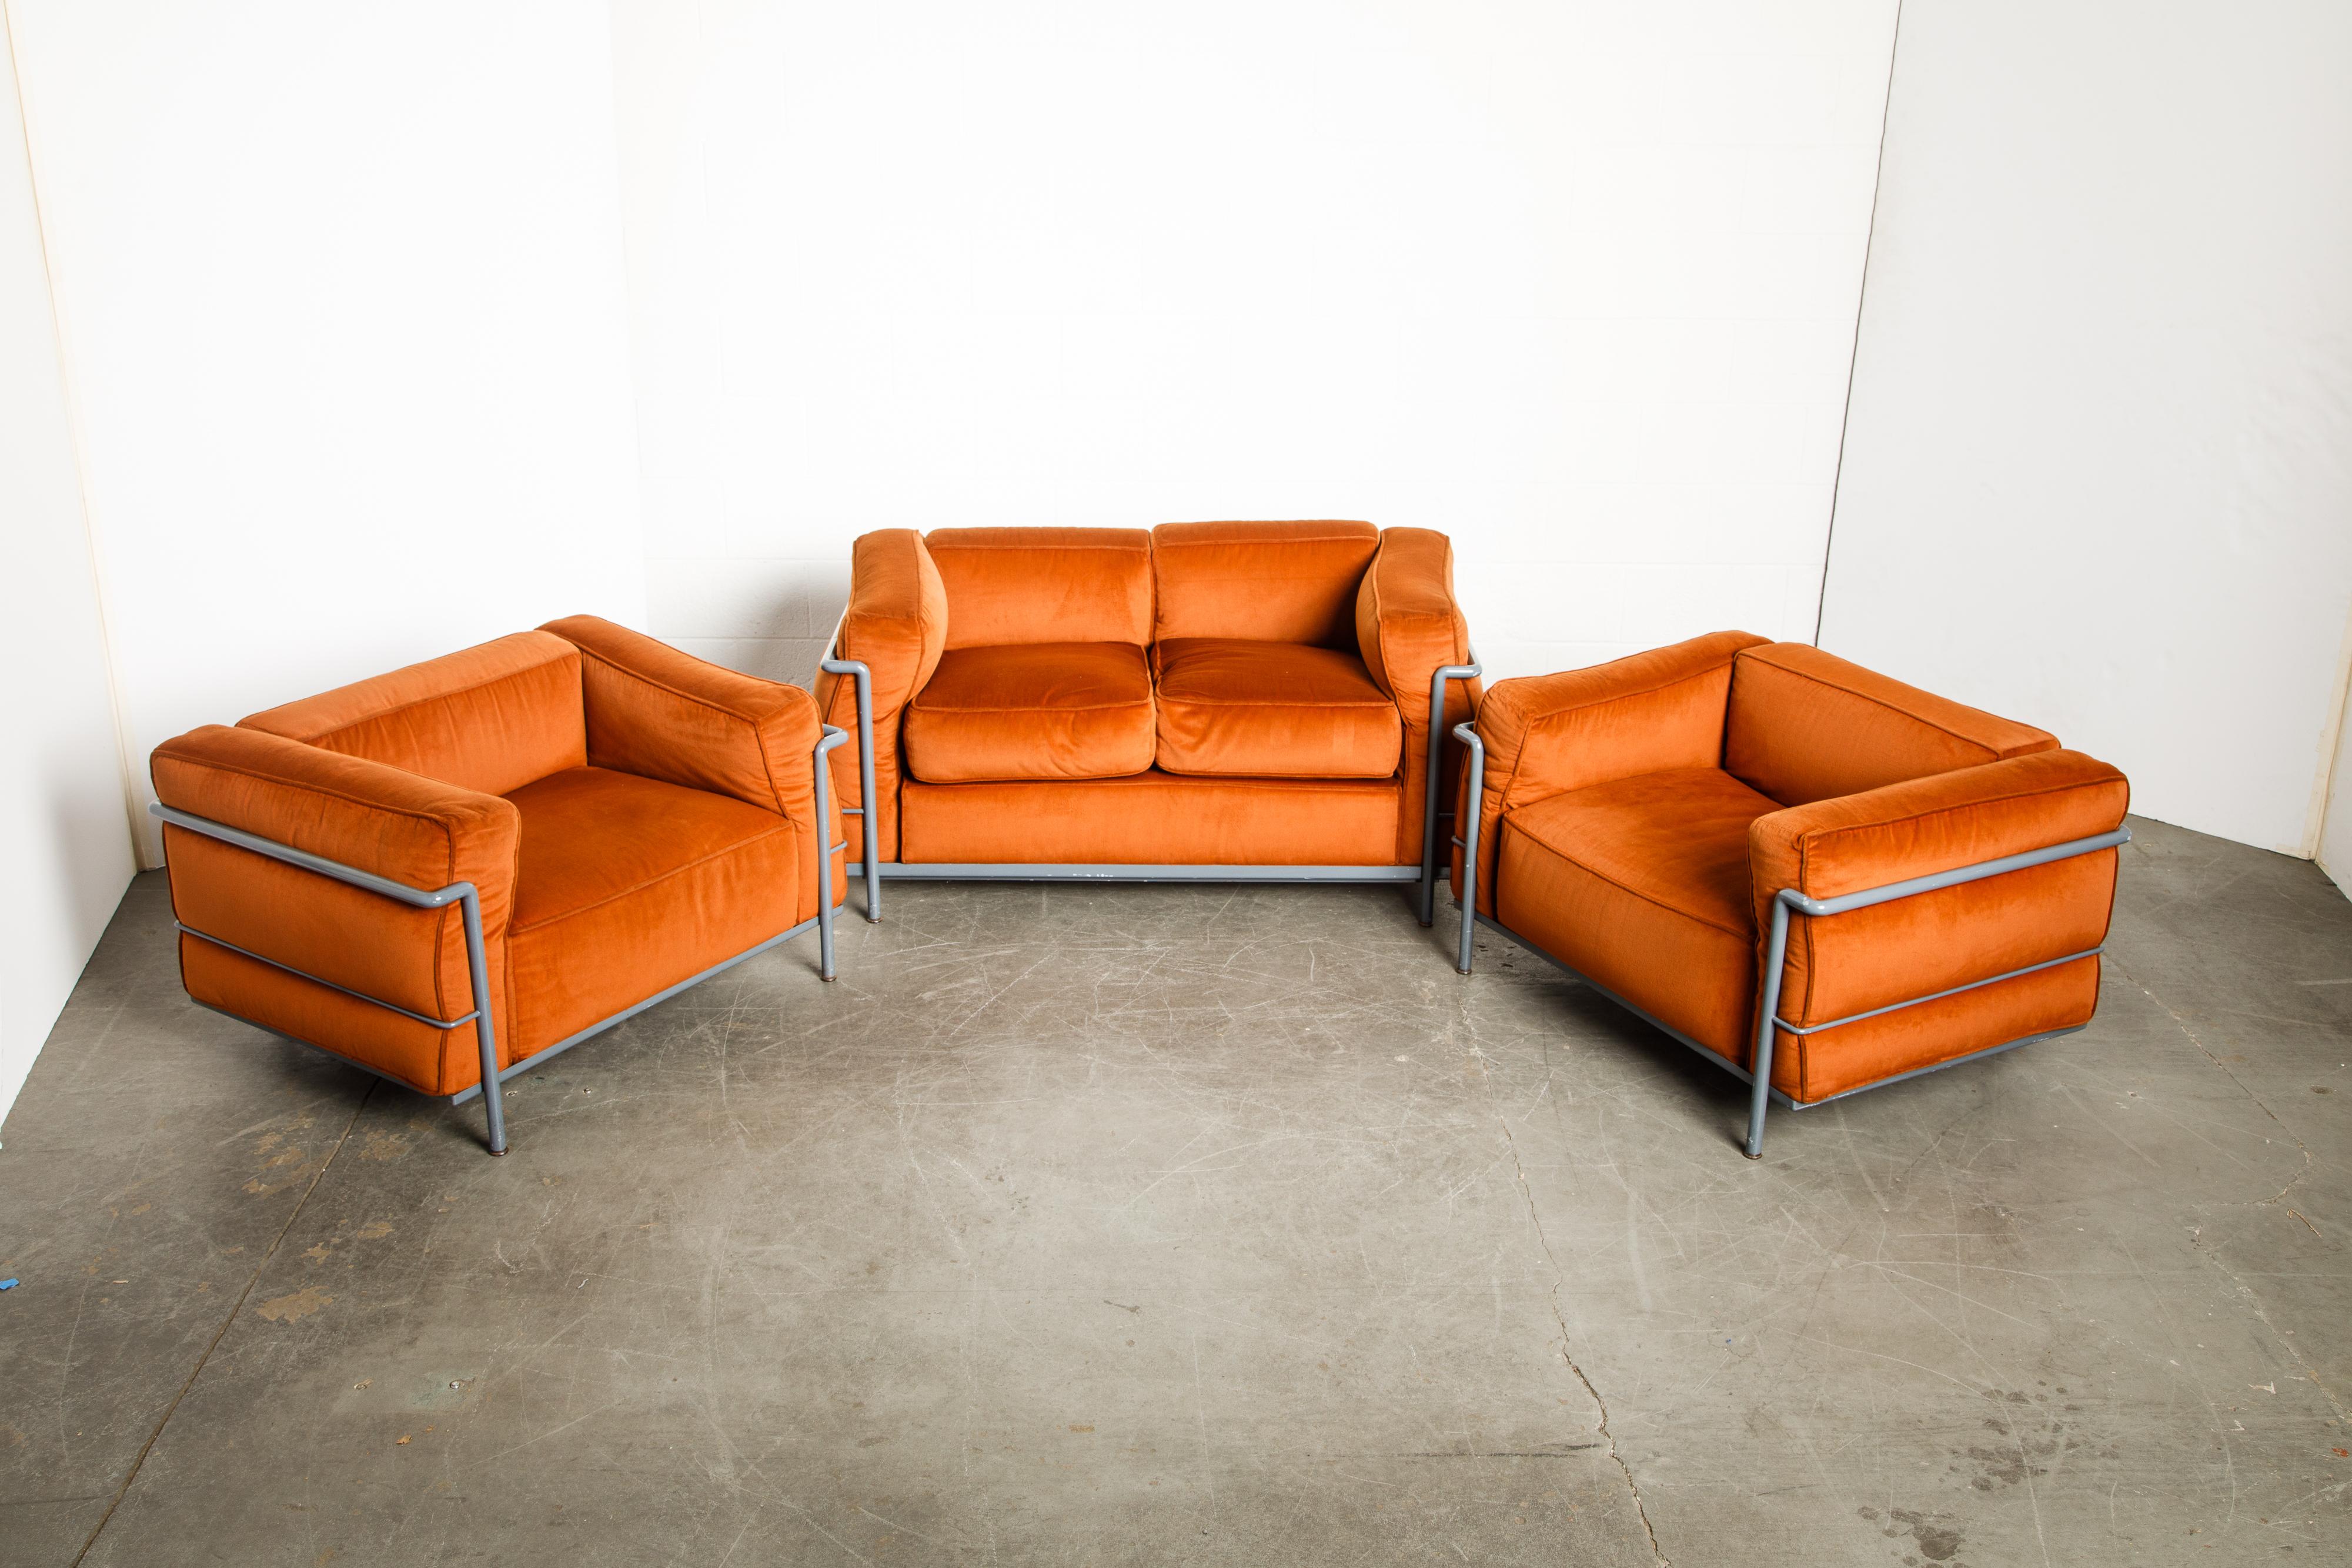 If you want the most comfortable and sizable club chair and sofa to sink your heinie into, this grouping of three Le Corbusier for Cassina (signed) LC2 and LC3's is the living room set for you (and of course, your heinie). Large and in-charge, the